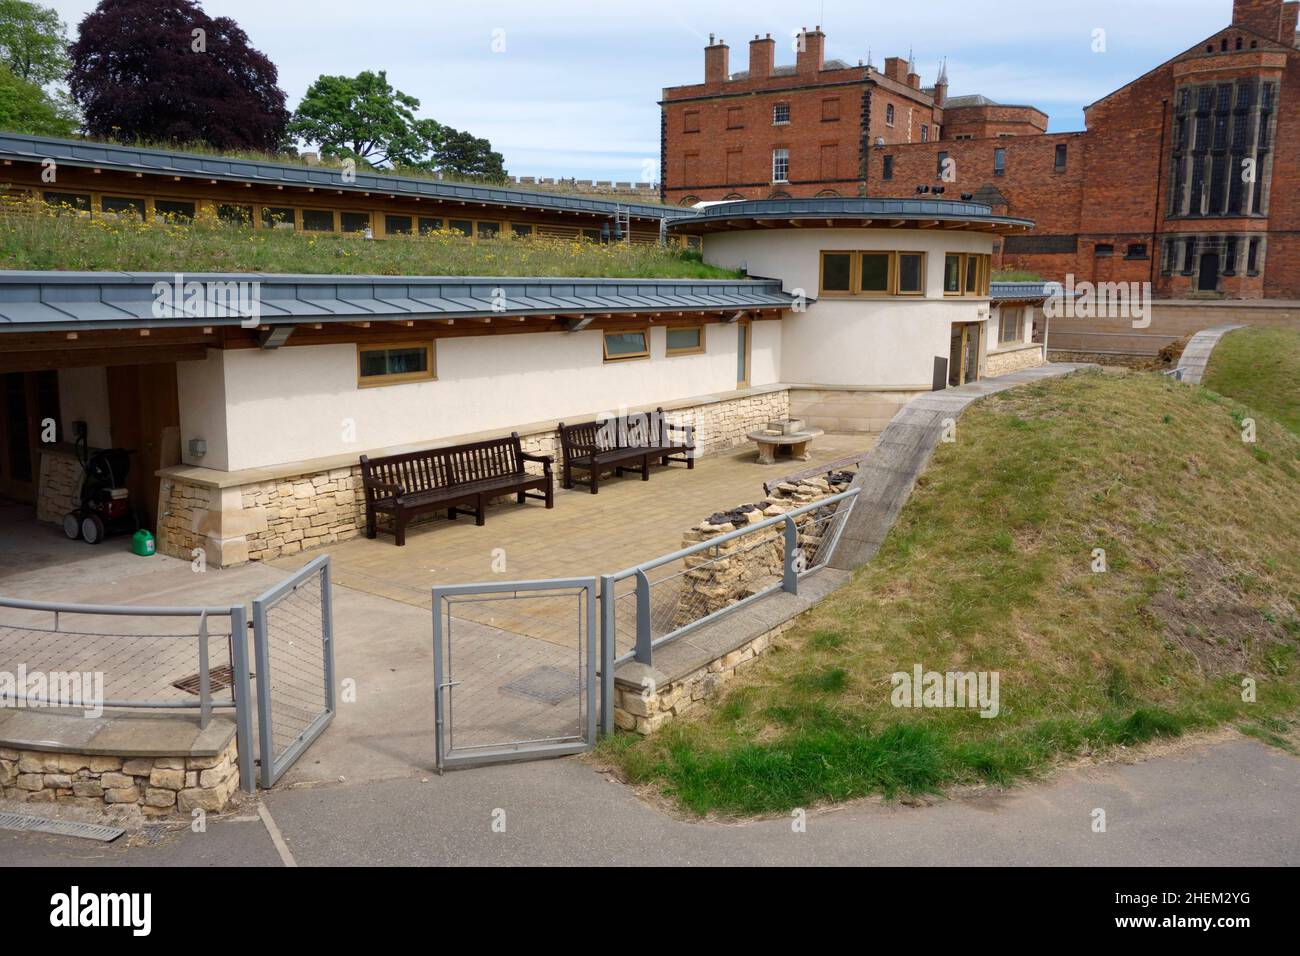 The Heritage Skills Centre at Lincoln Castle Stock Photo